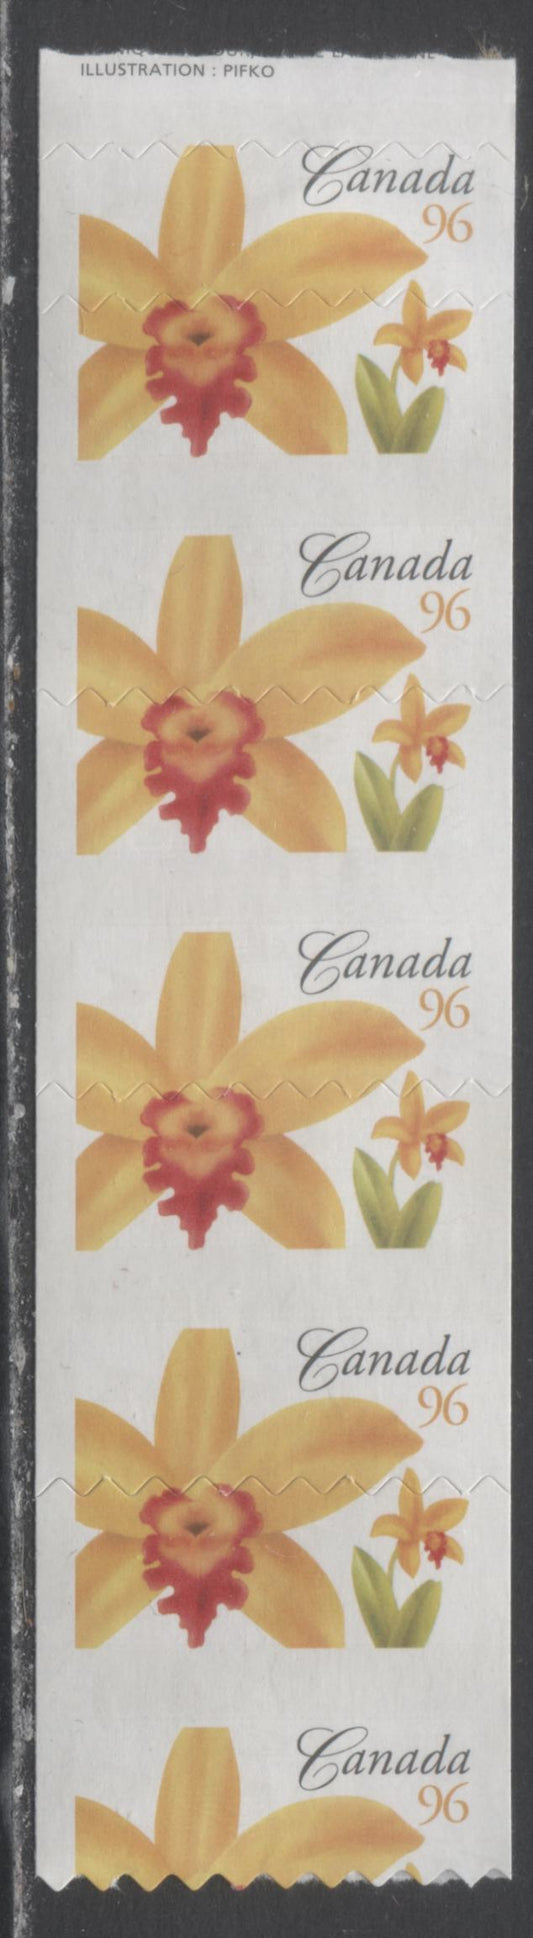 Lot 87 Canada #2245T1 96c Multicolored Fire Dancer', 2007 Flower Definitive Coils, A VFNH Gutter Strip Of 4 With Die Cutting Shifted Down 4.5mm, Resulting In All 4 Stamps Having G4dH Tagging Errors & A Tiny 7mm Stamp At Top